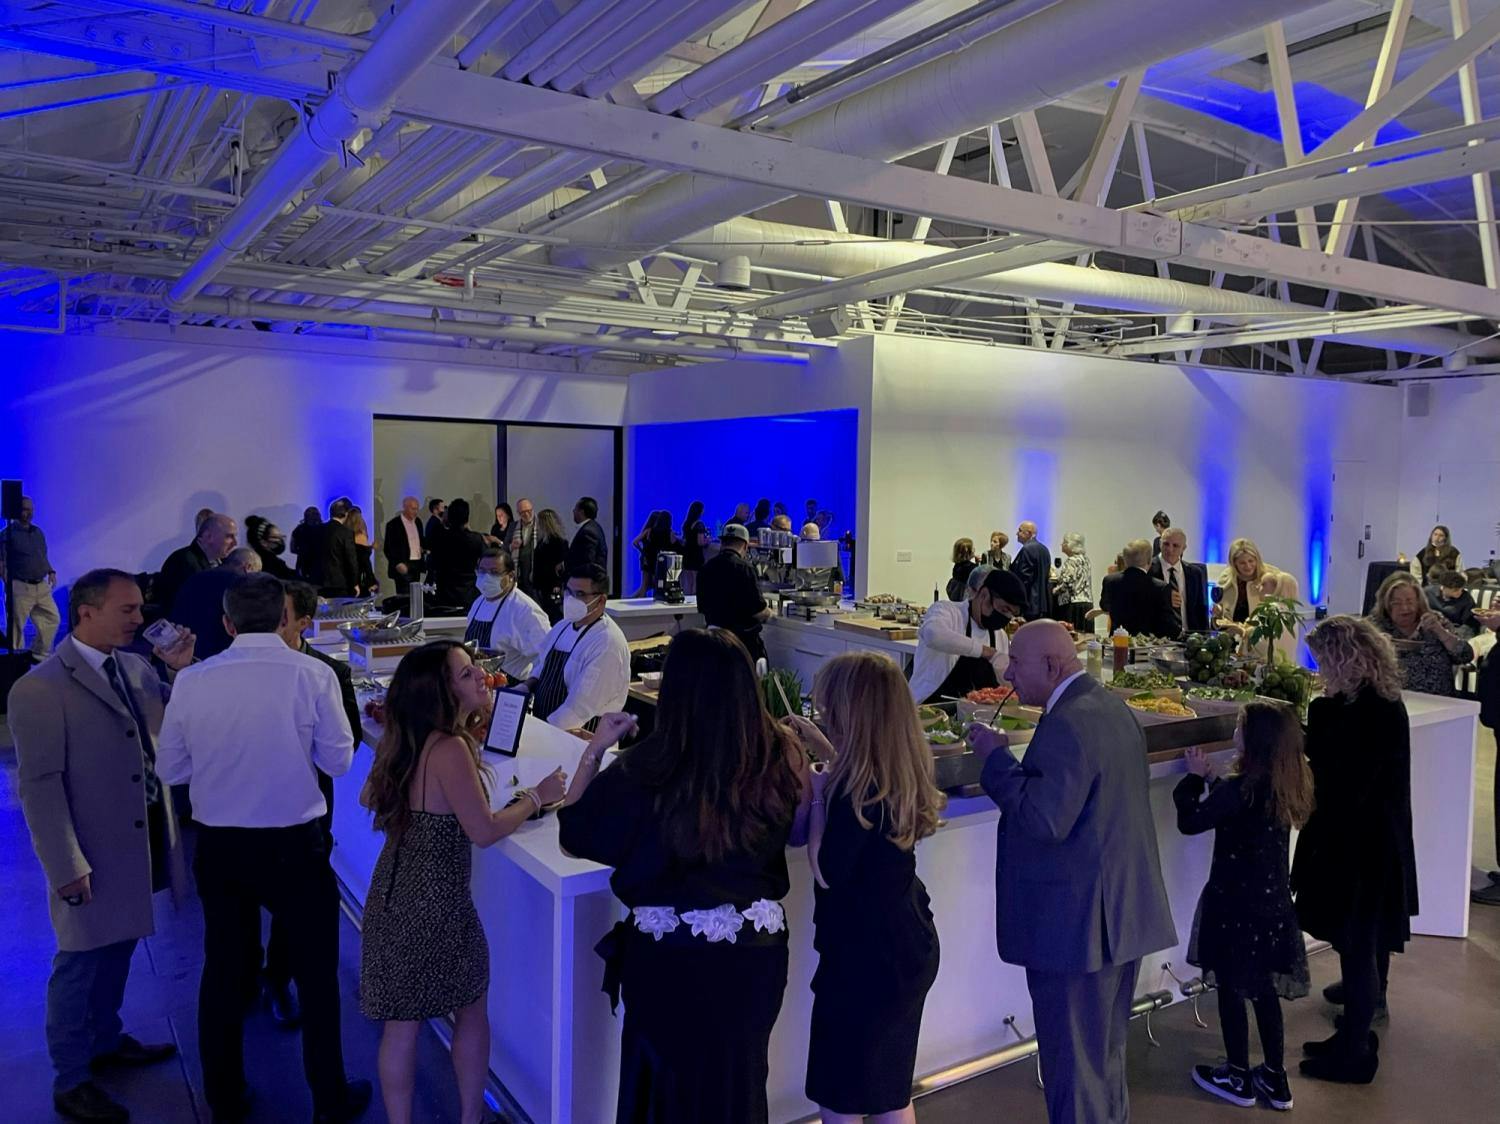 A bustling gallery event with guests mingling around a well-appointed buffet under soft blue lighting and industrial beams.